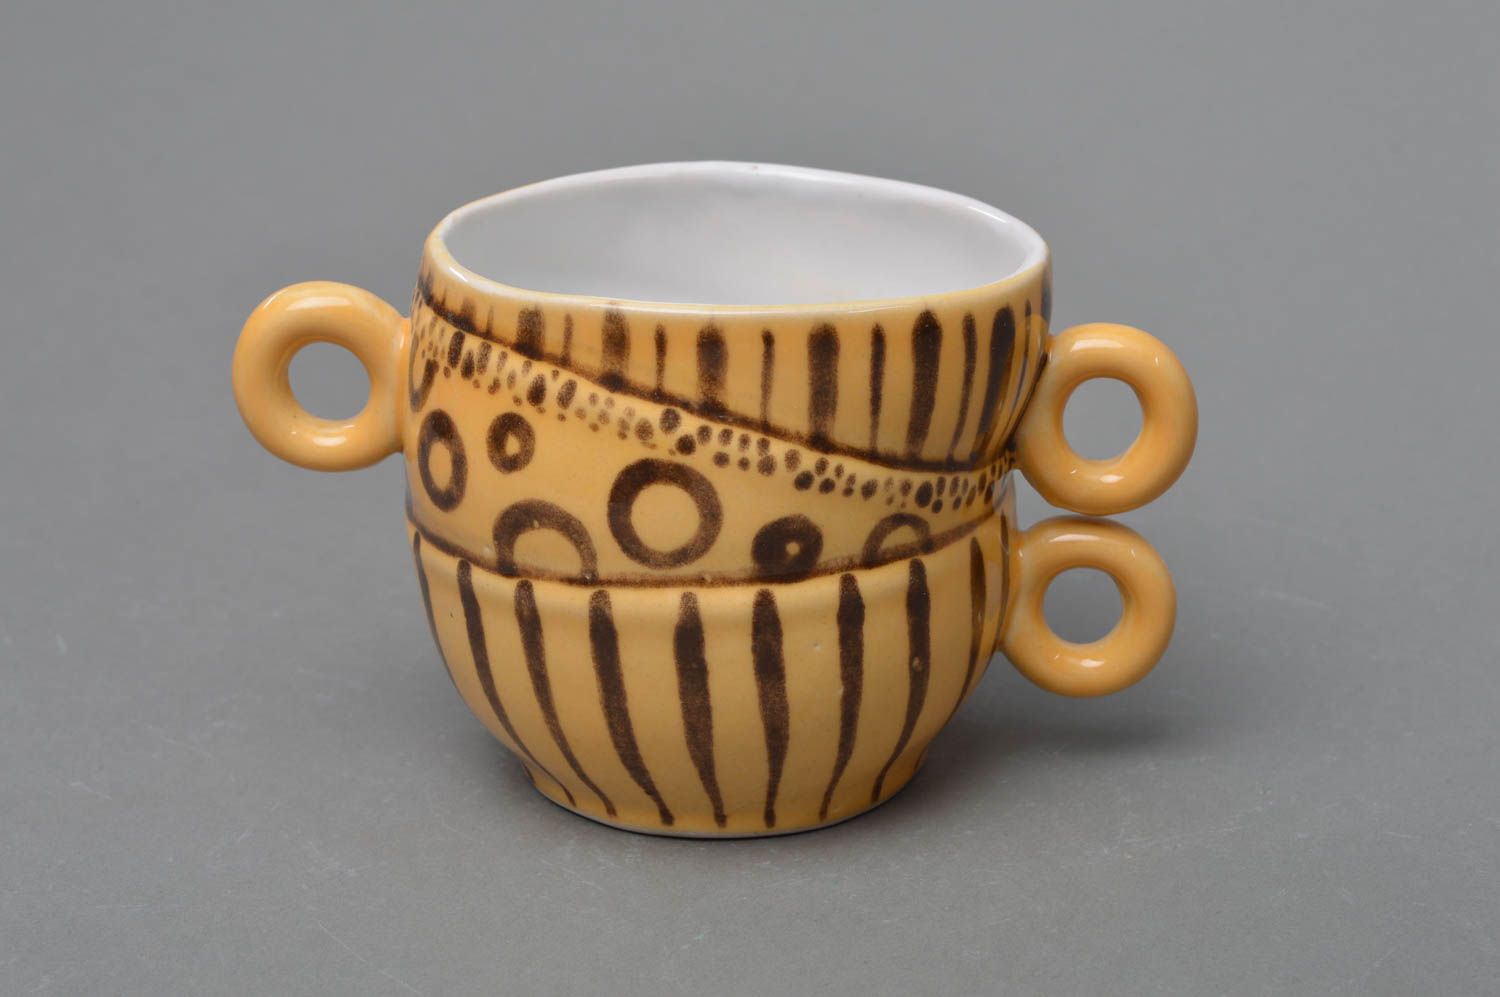 Art ceramic glazed 5 oz coffee cup in yellow and brown colors with three handles  photo 1